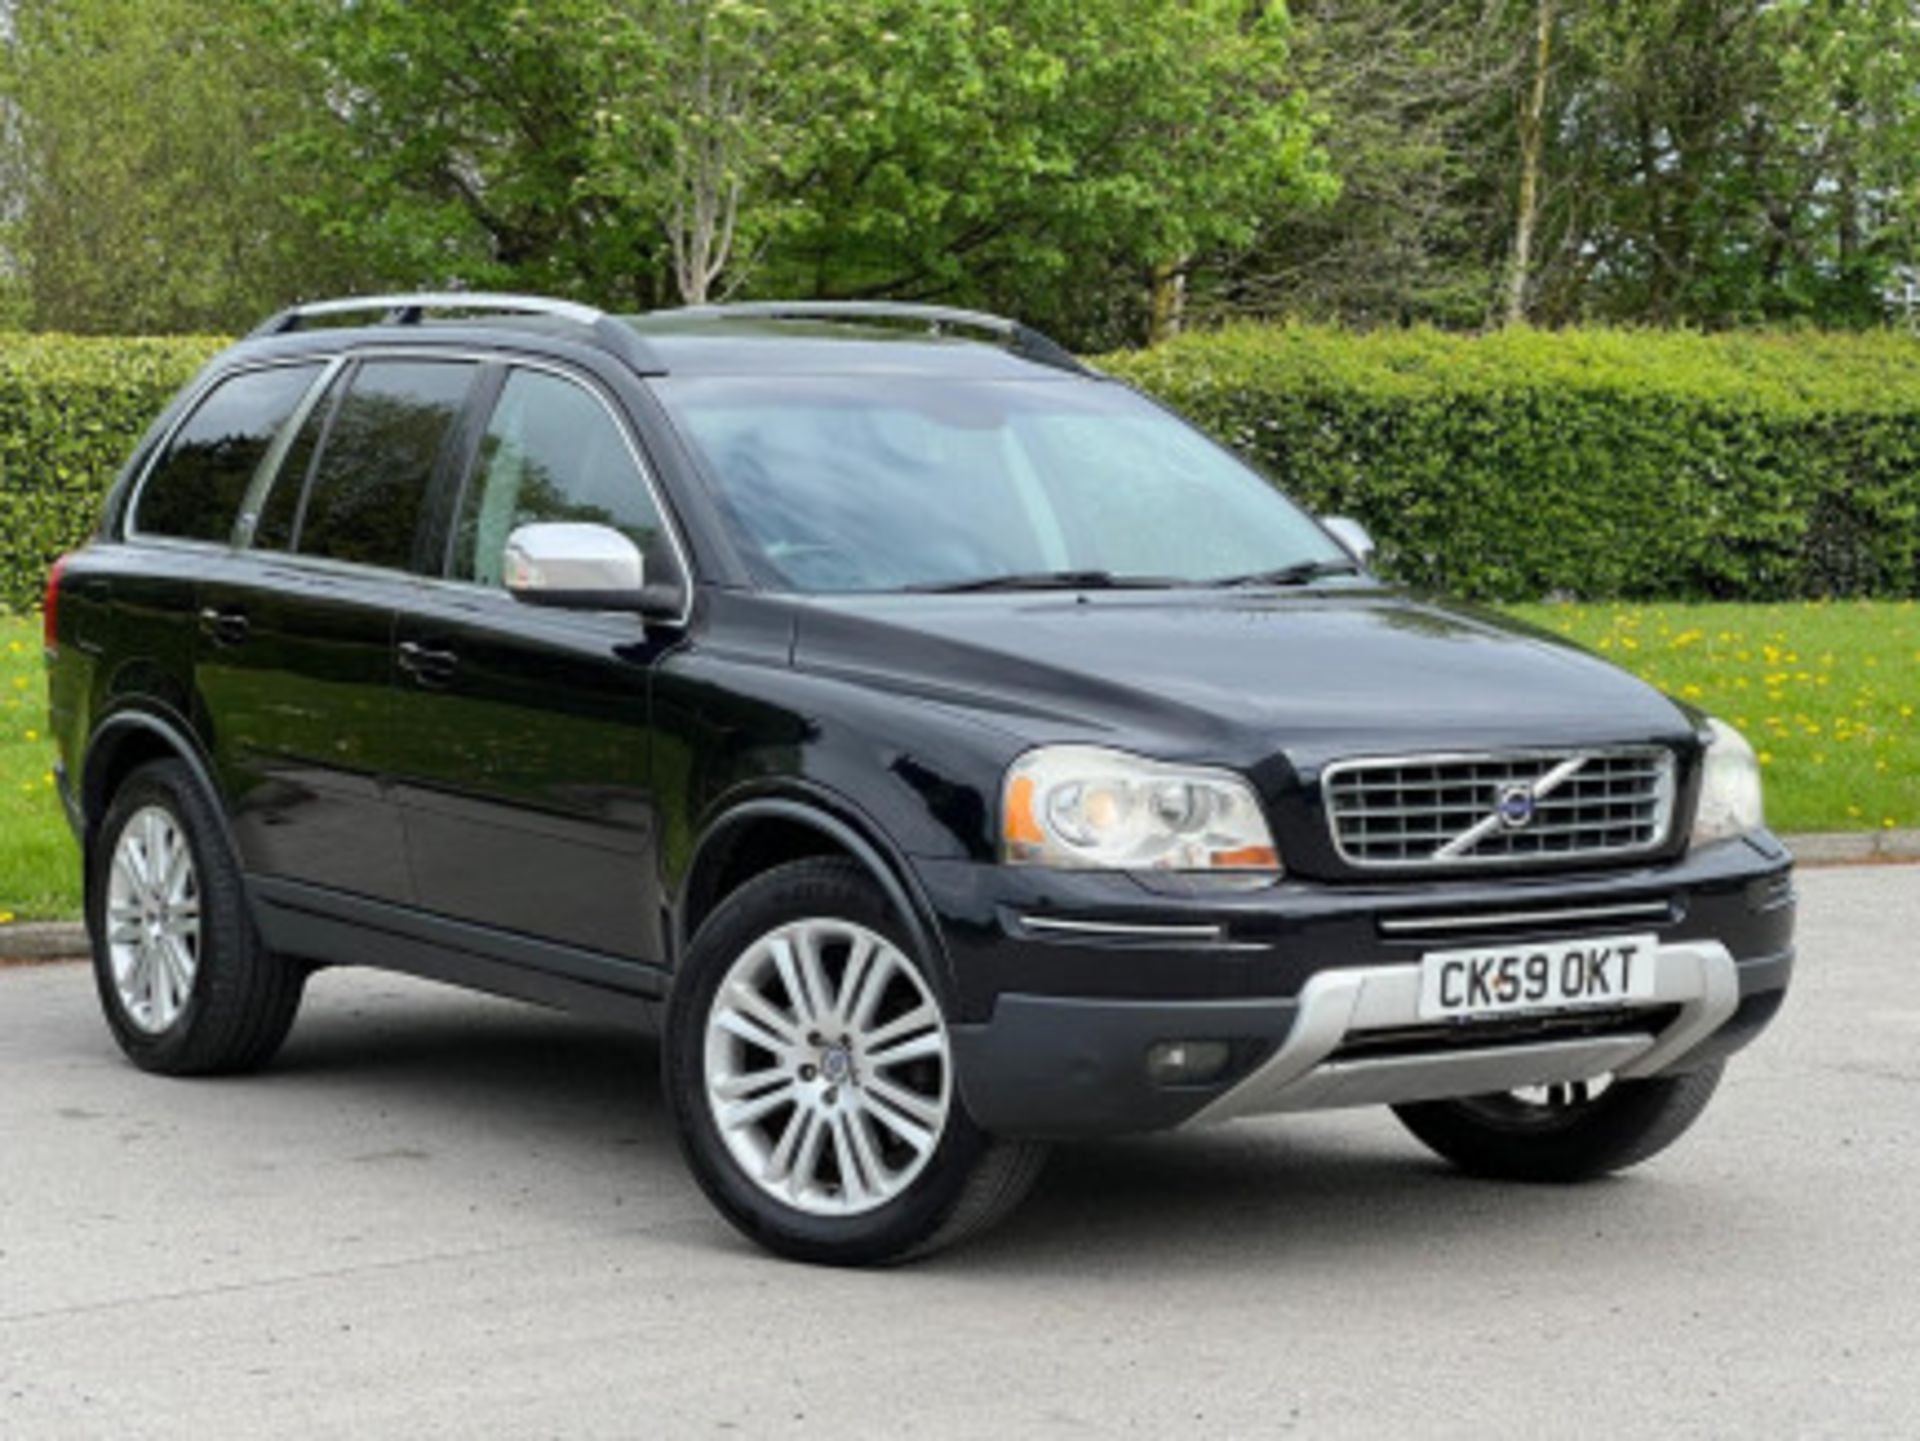 VOLVO XC90 2.4 D5 EXECUTIVE GEARTRONIC AWD, 5DR >>--NO VAT ON HAMMER--<< - Image 70 of 136